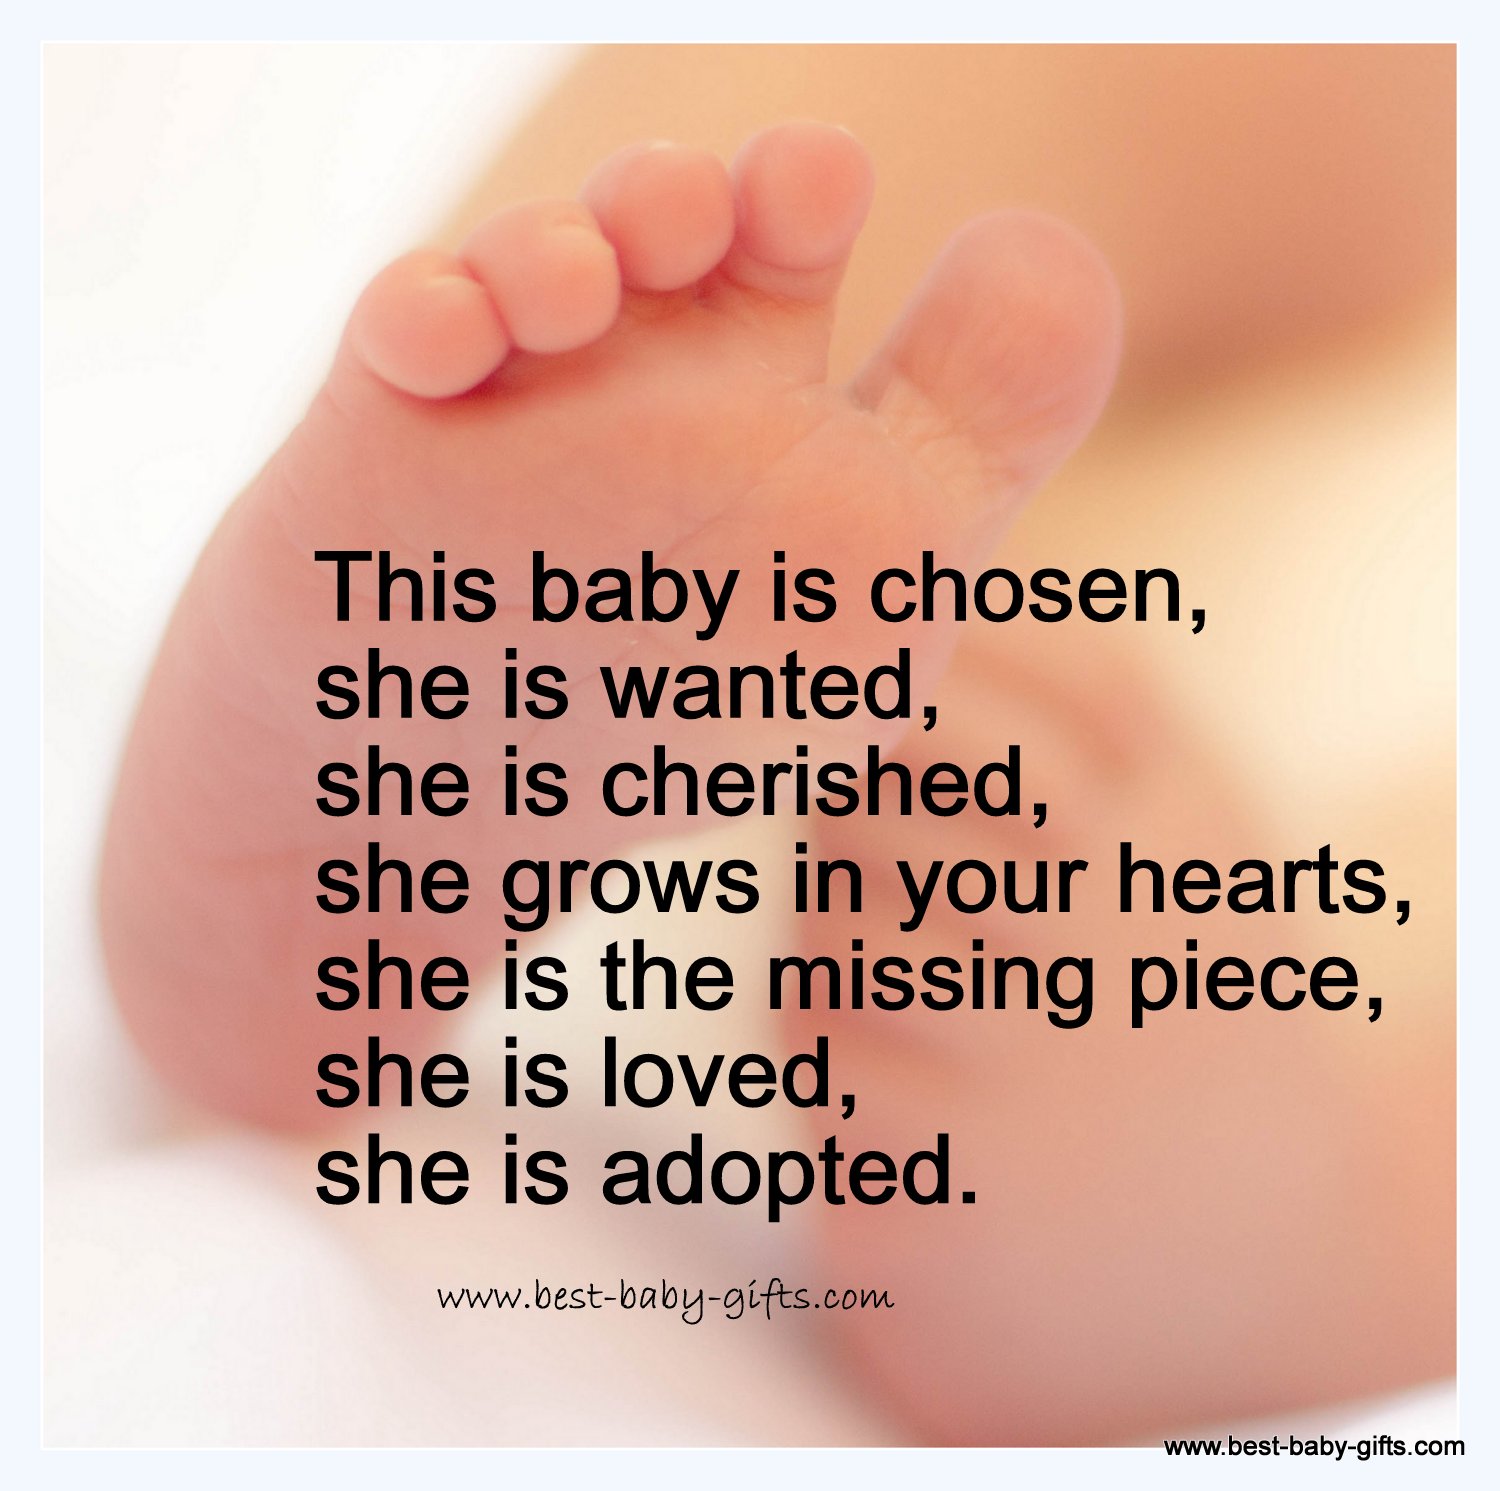 Adoption Quotes And Sayings Over 35 Messages For Adopted Children